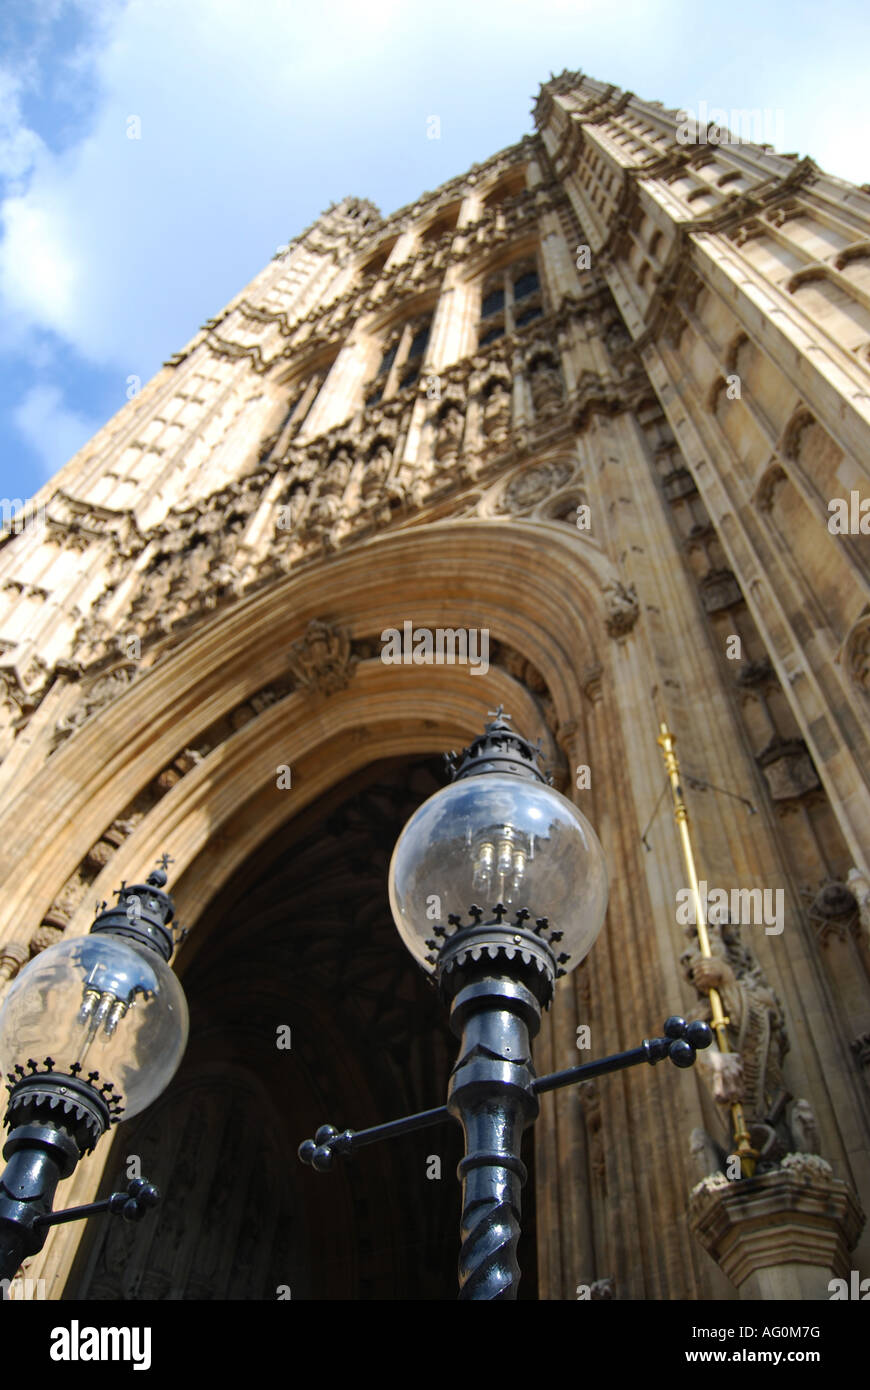 General View Of The Sovereigns Entrance At The Houses of Parliament Stock Photo